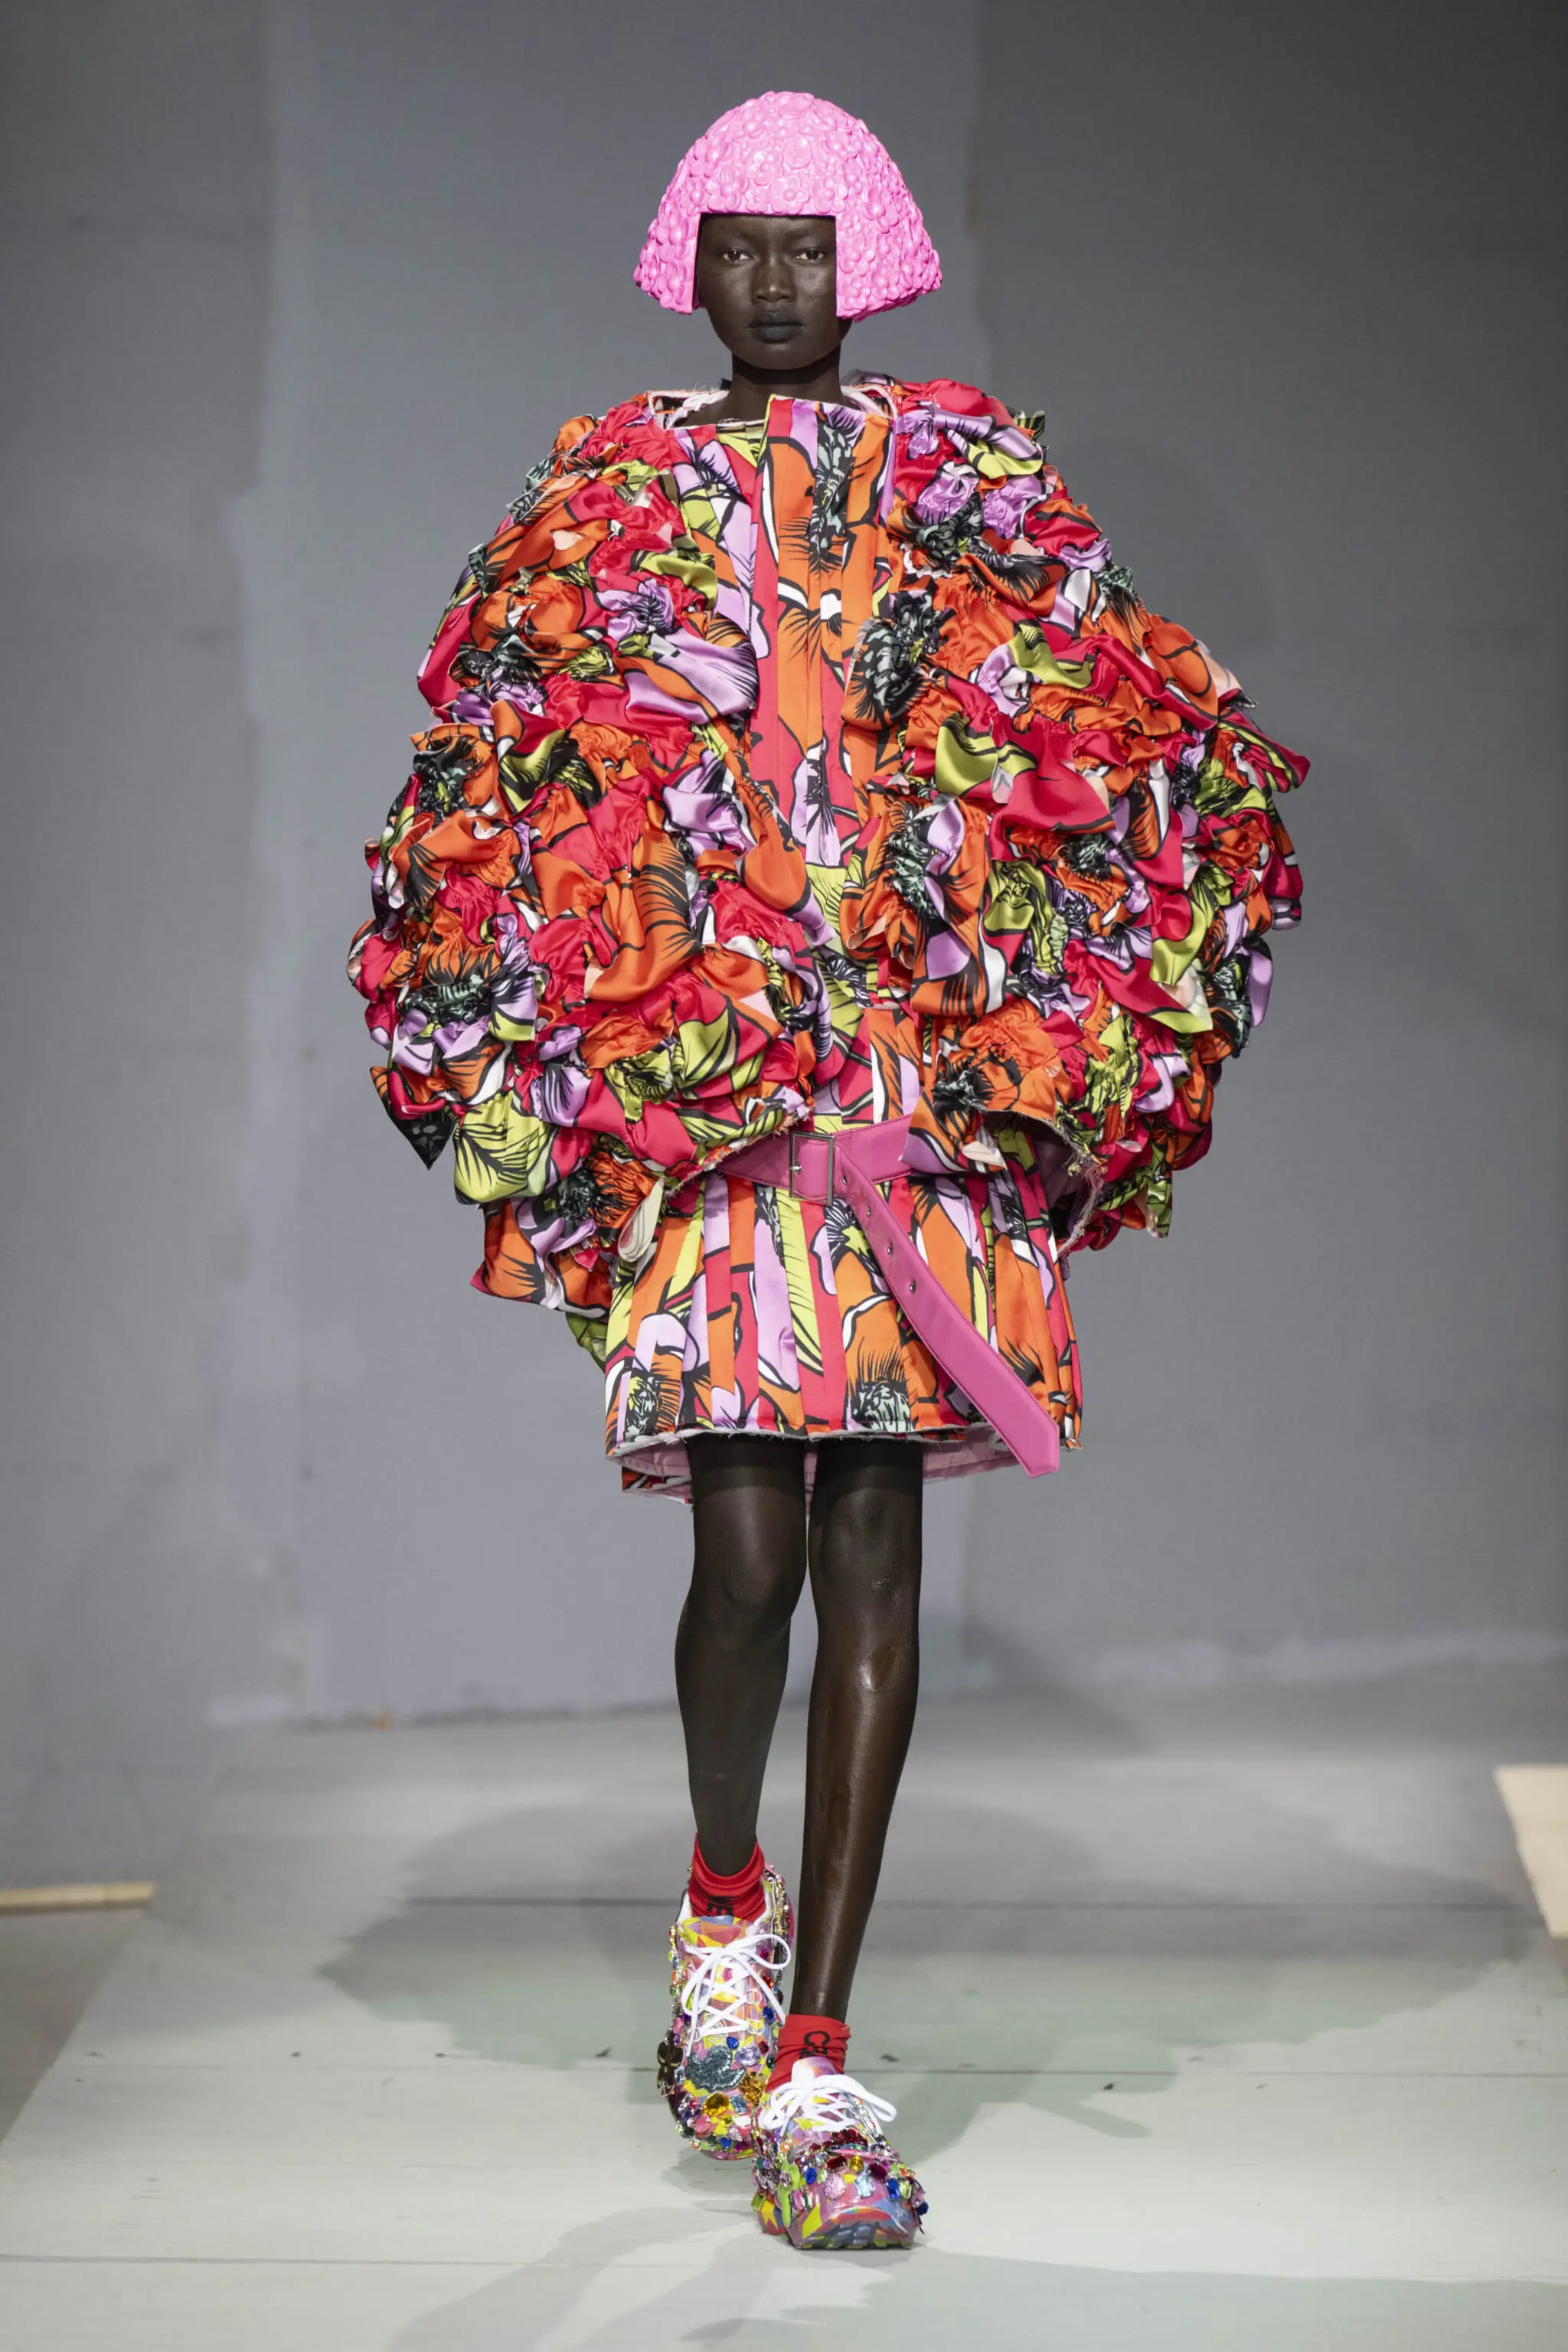 Comme des Garcons does the costumes for Olga Neuwirth's Orlando